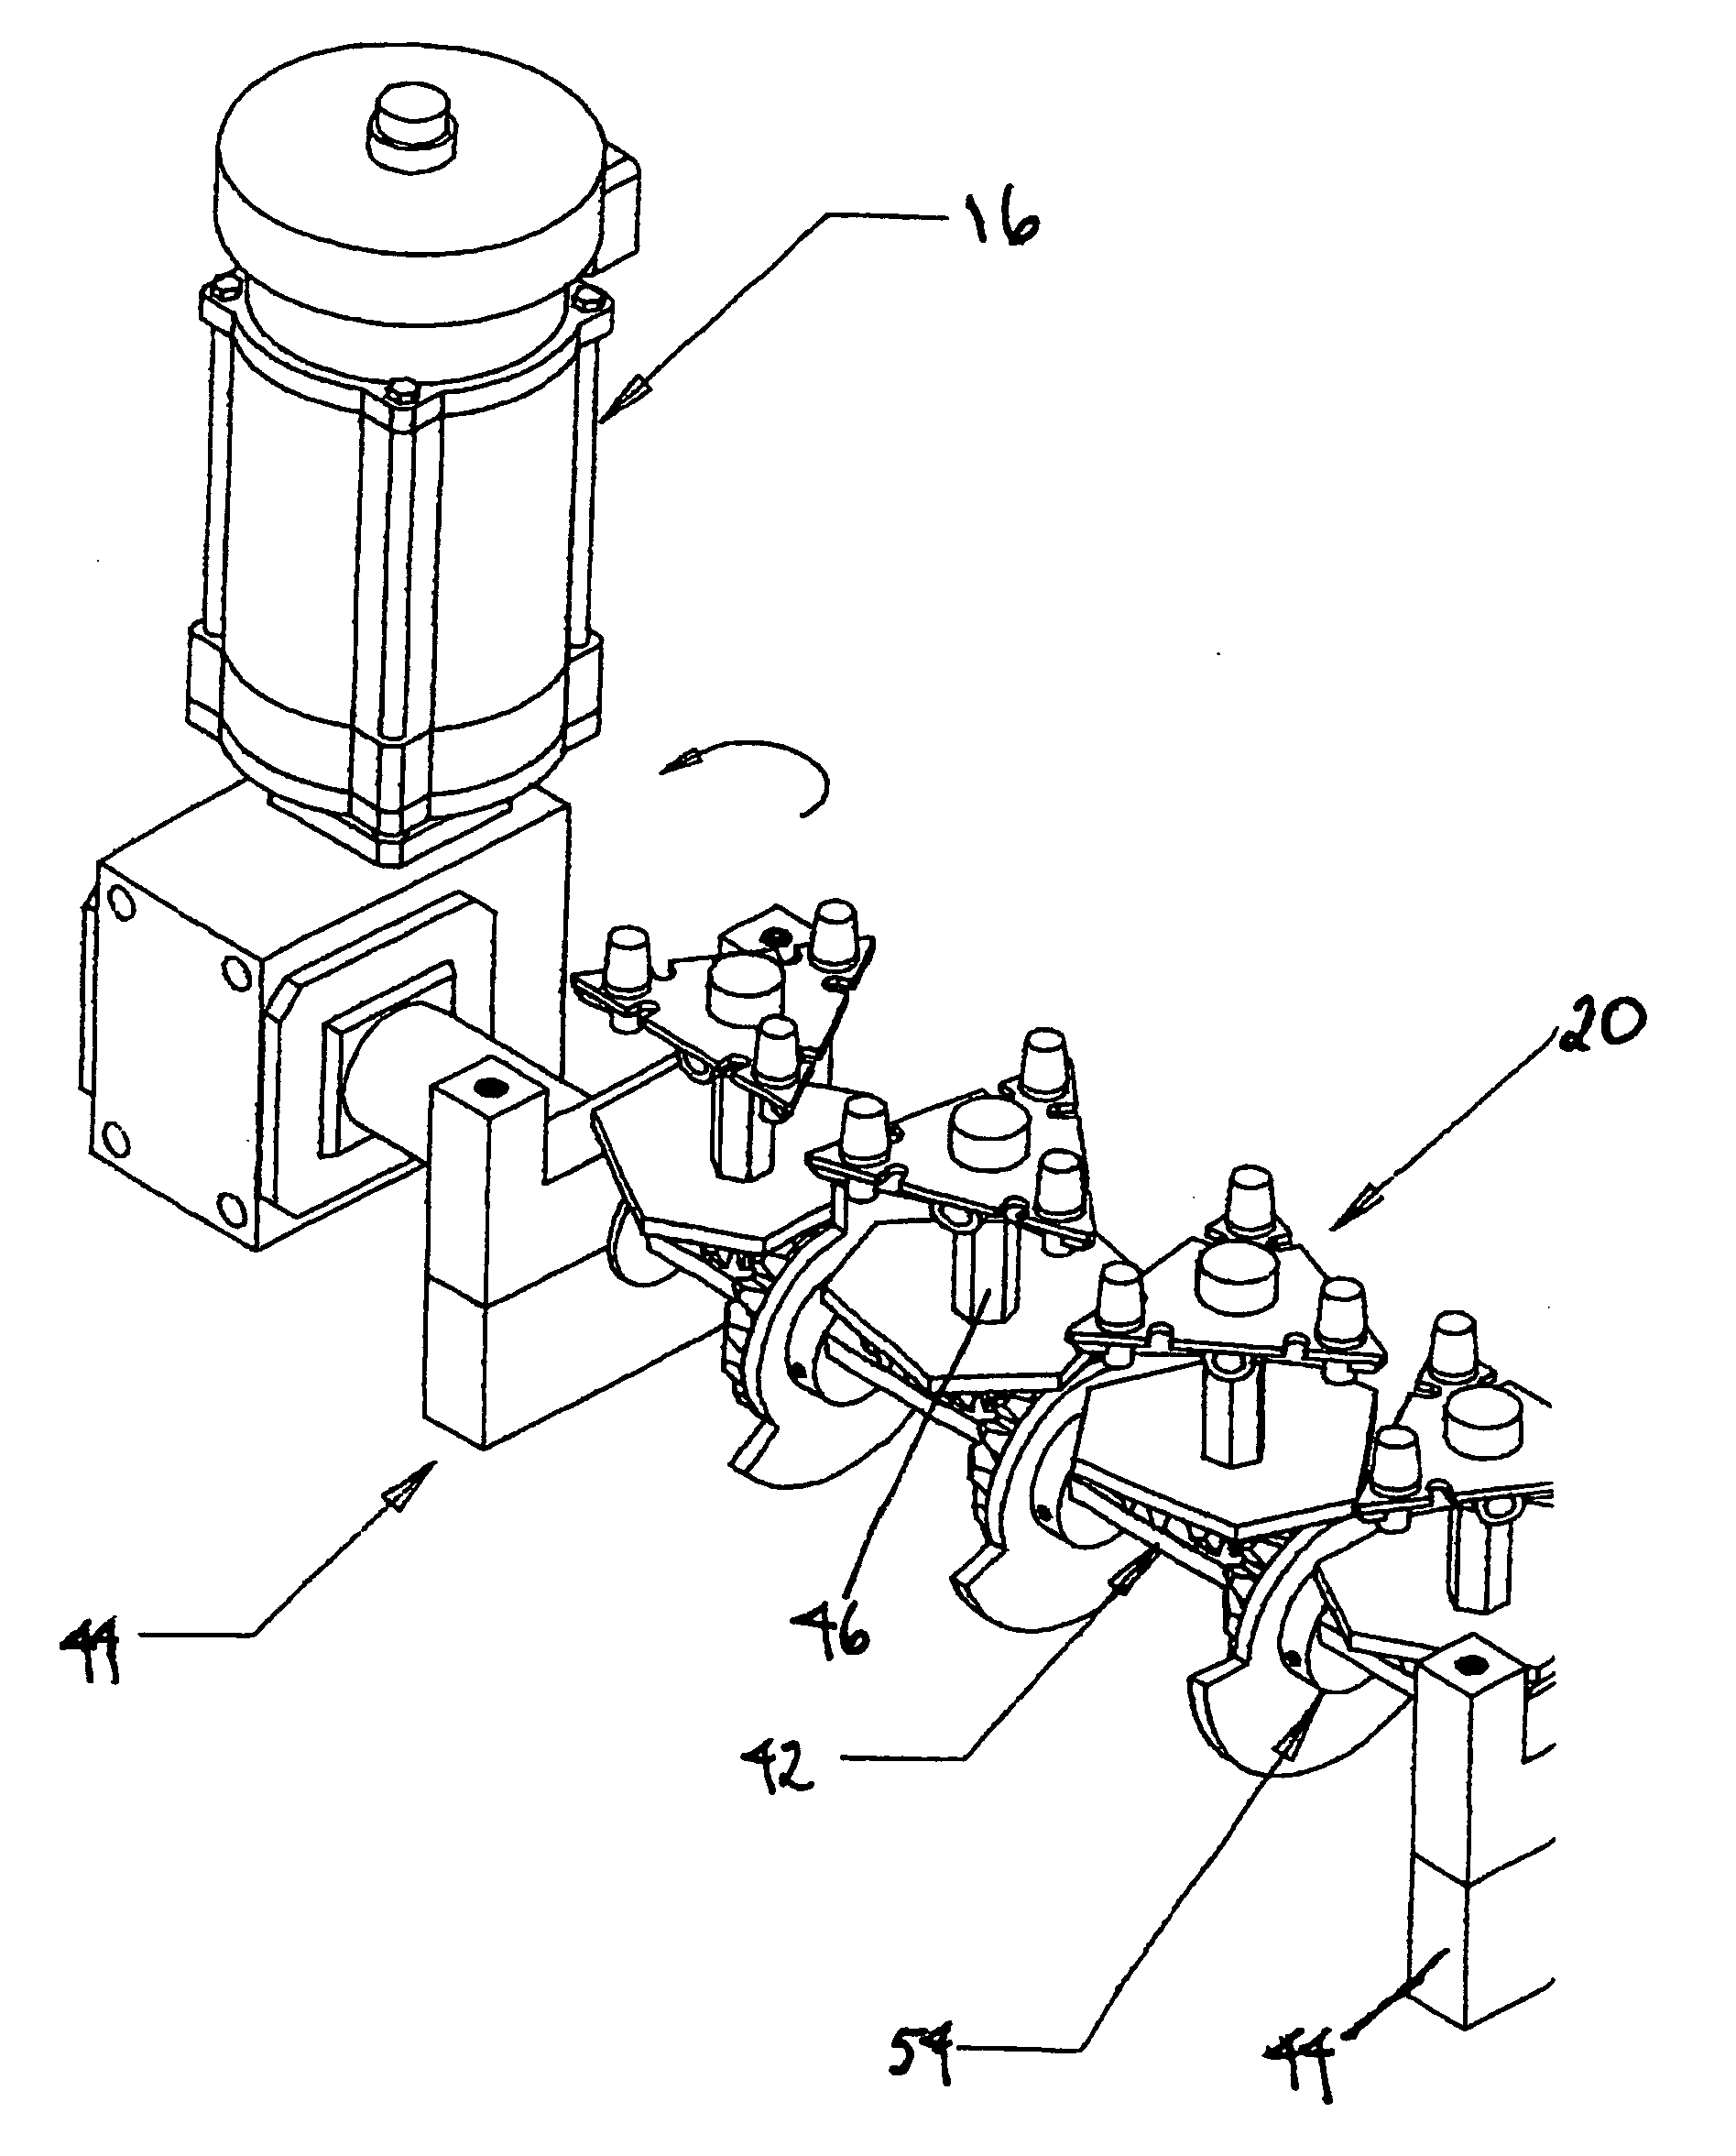 Gear alignment and slip assembly for drive transmission system of multi-faced signs and billboards